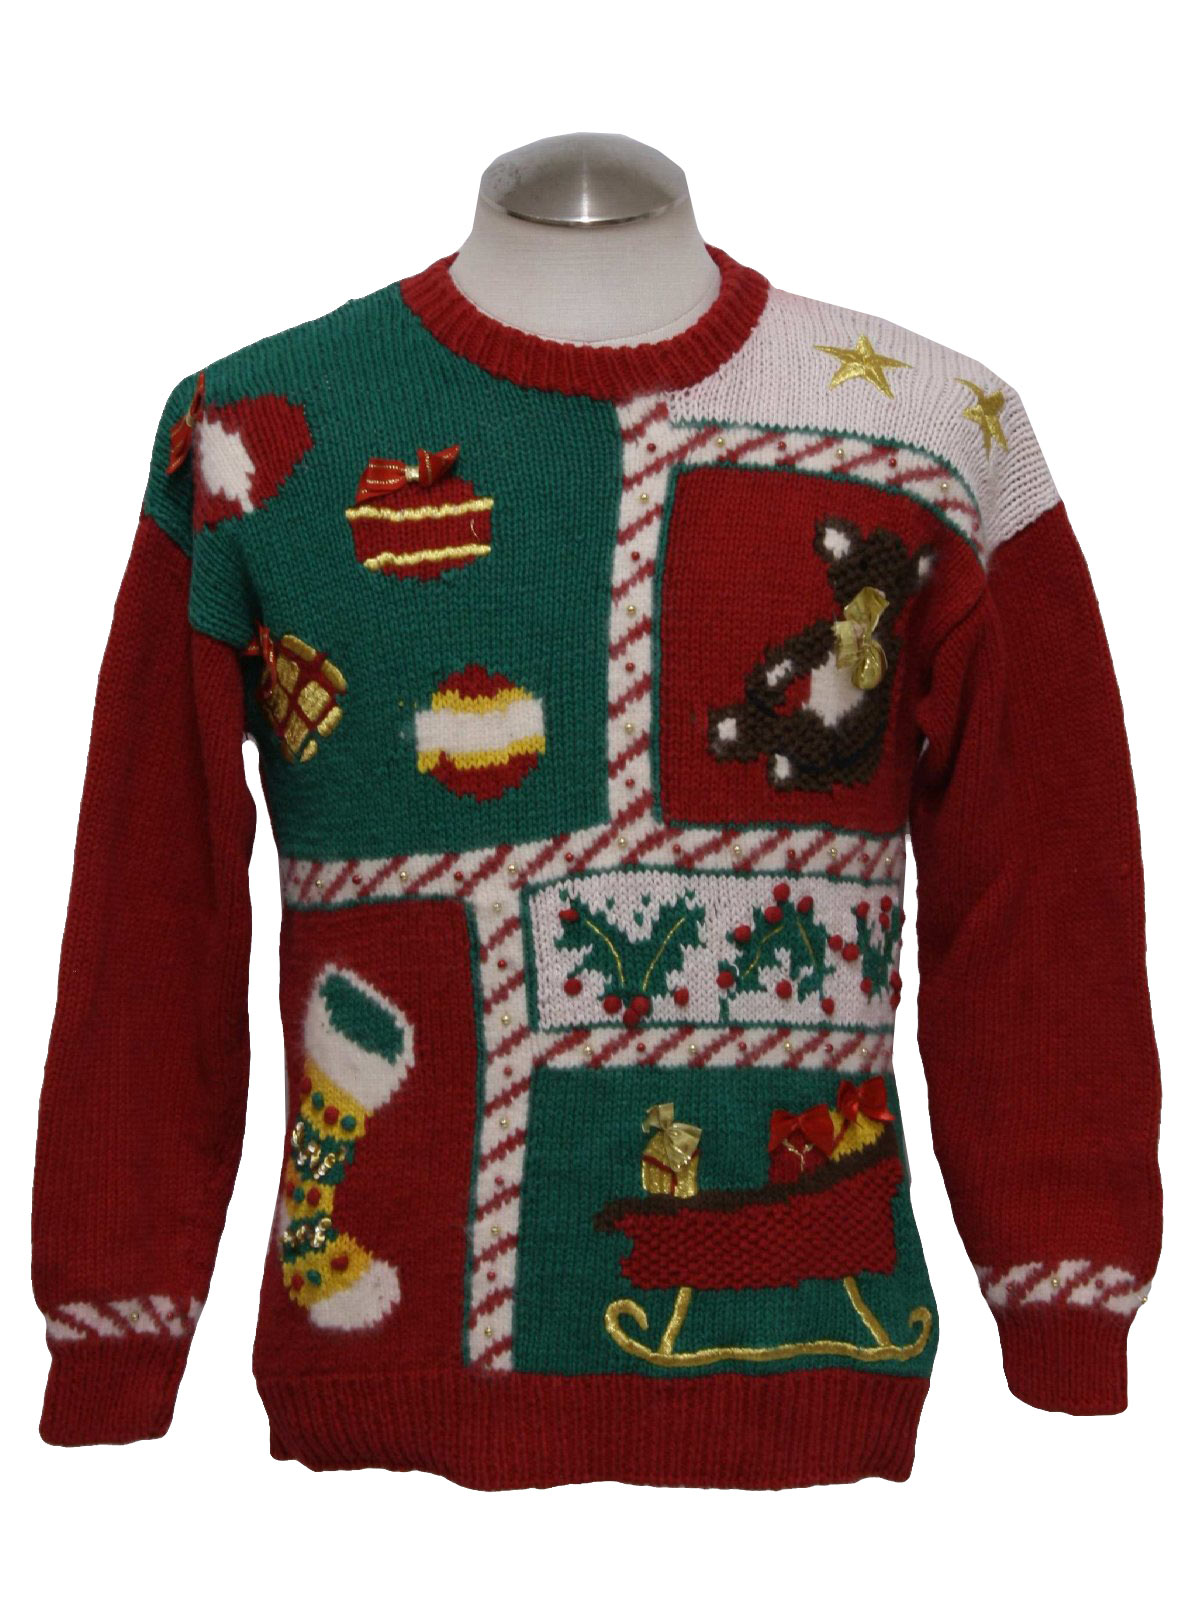 Christmas Sweater: retro look -Charter Club- Unisex red, green and ...